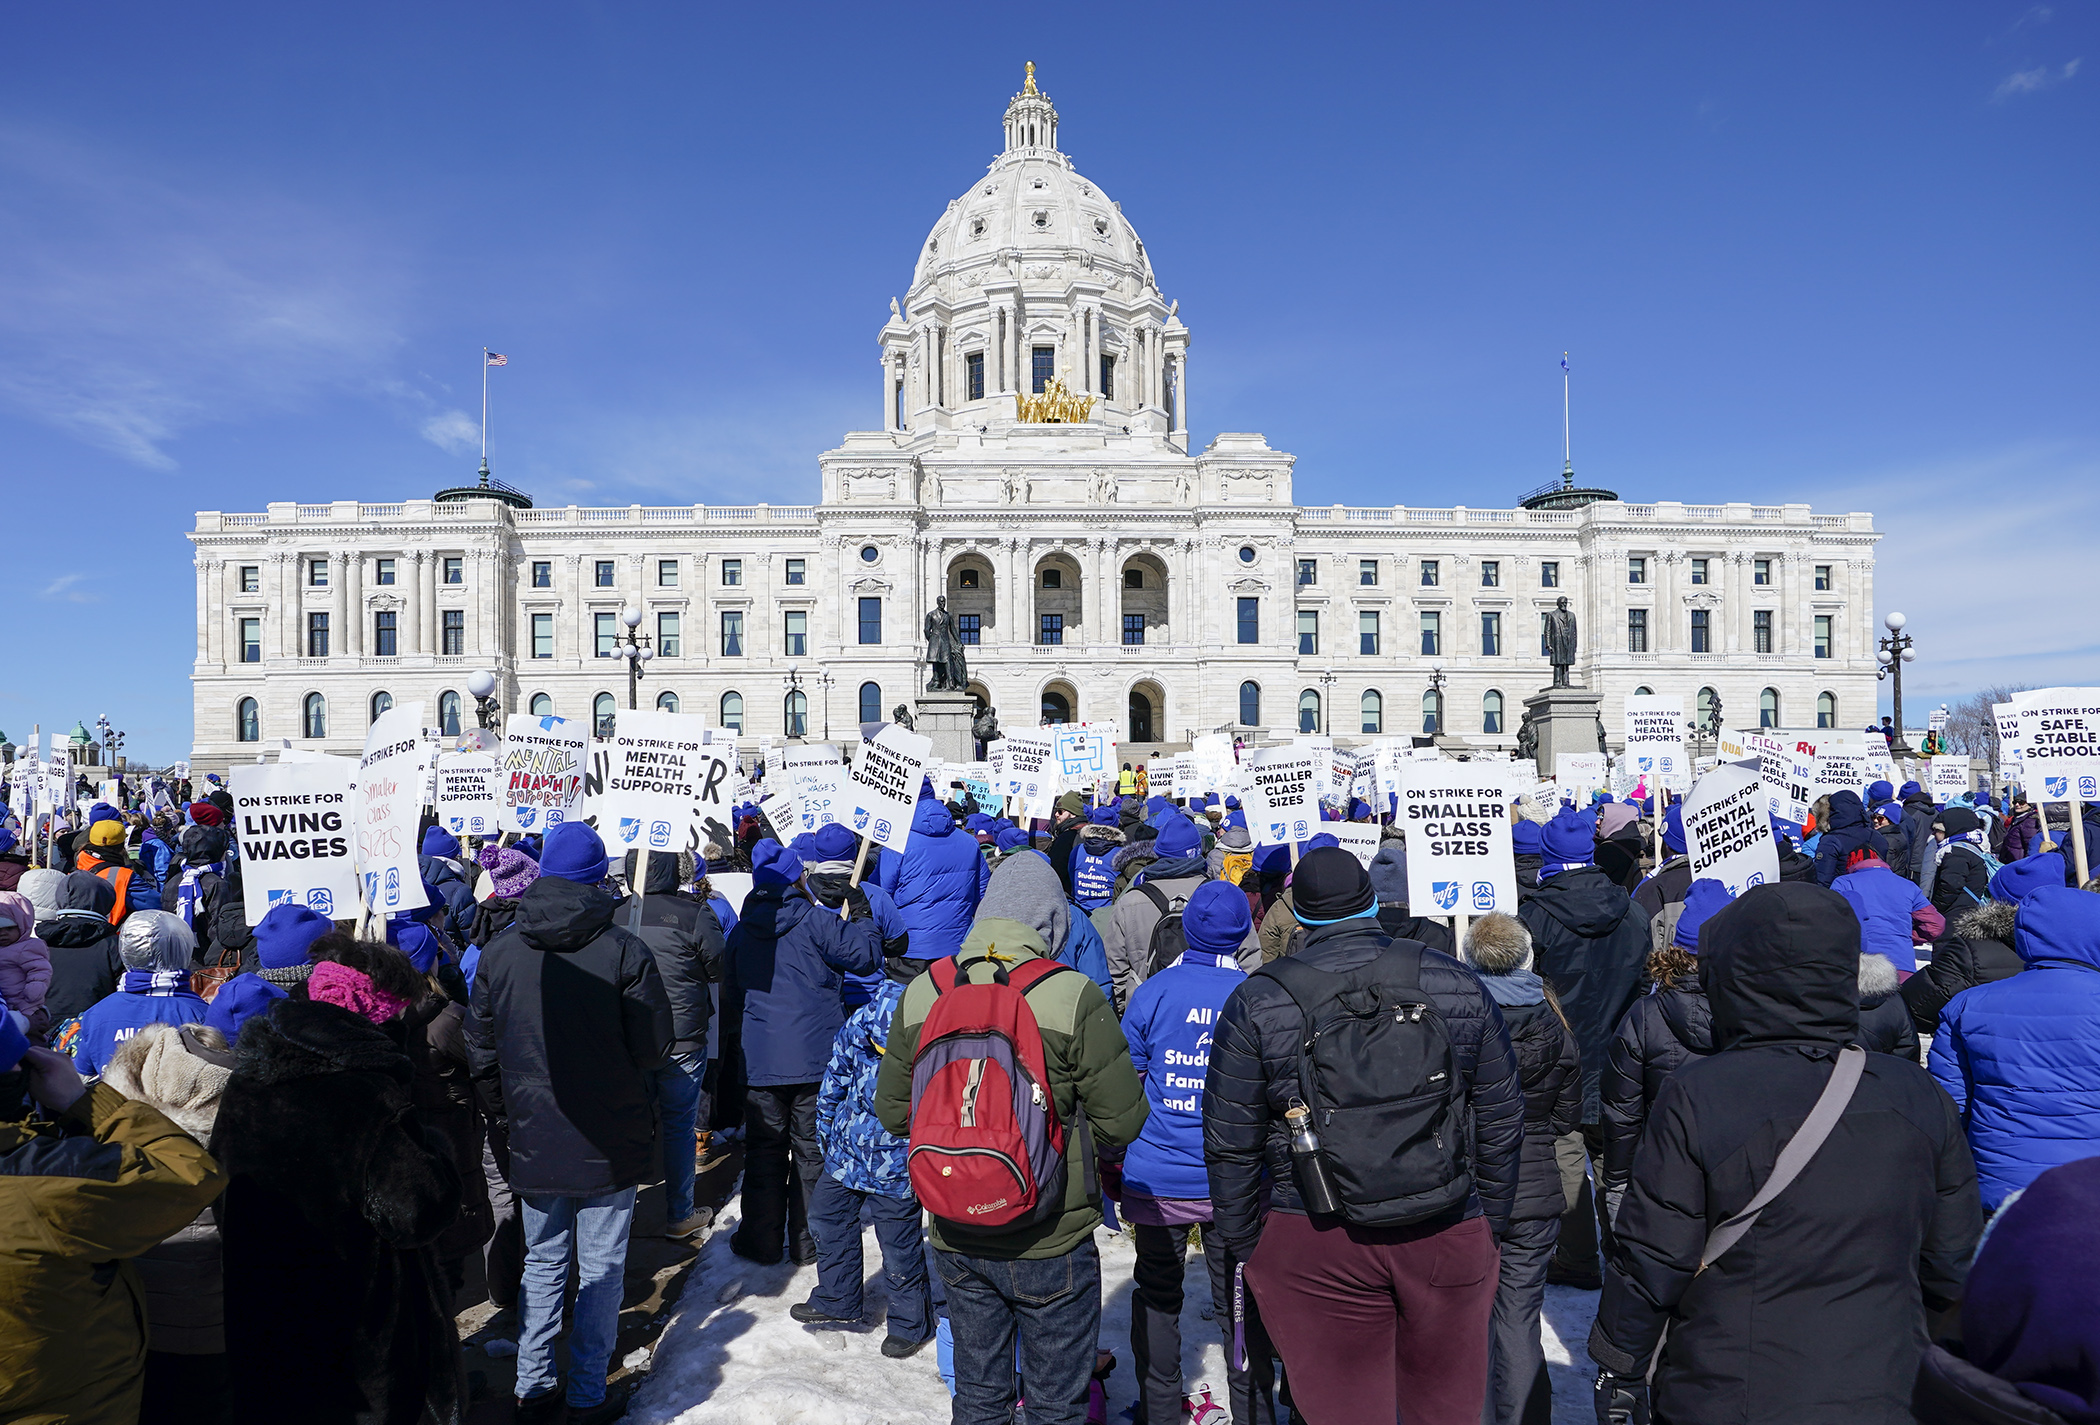 Minnesota House Committee Advances Bill to Provide Unemployment Benefits for Striking Workers